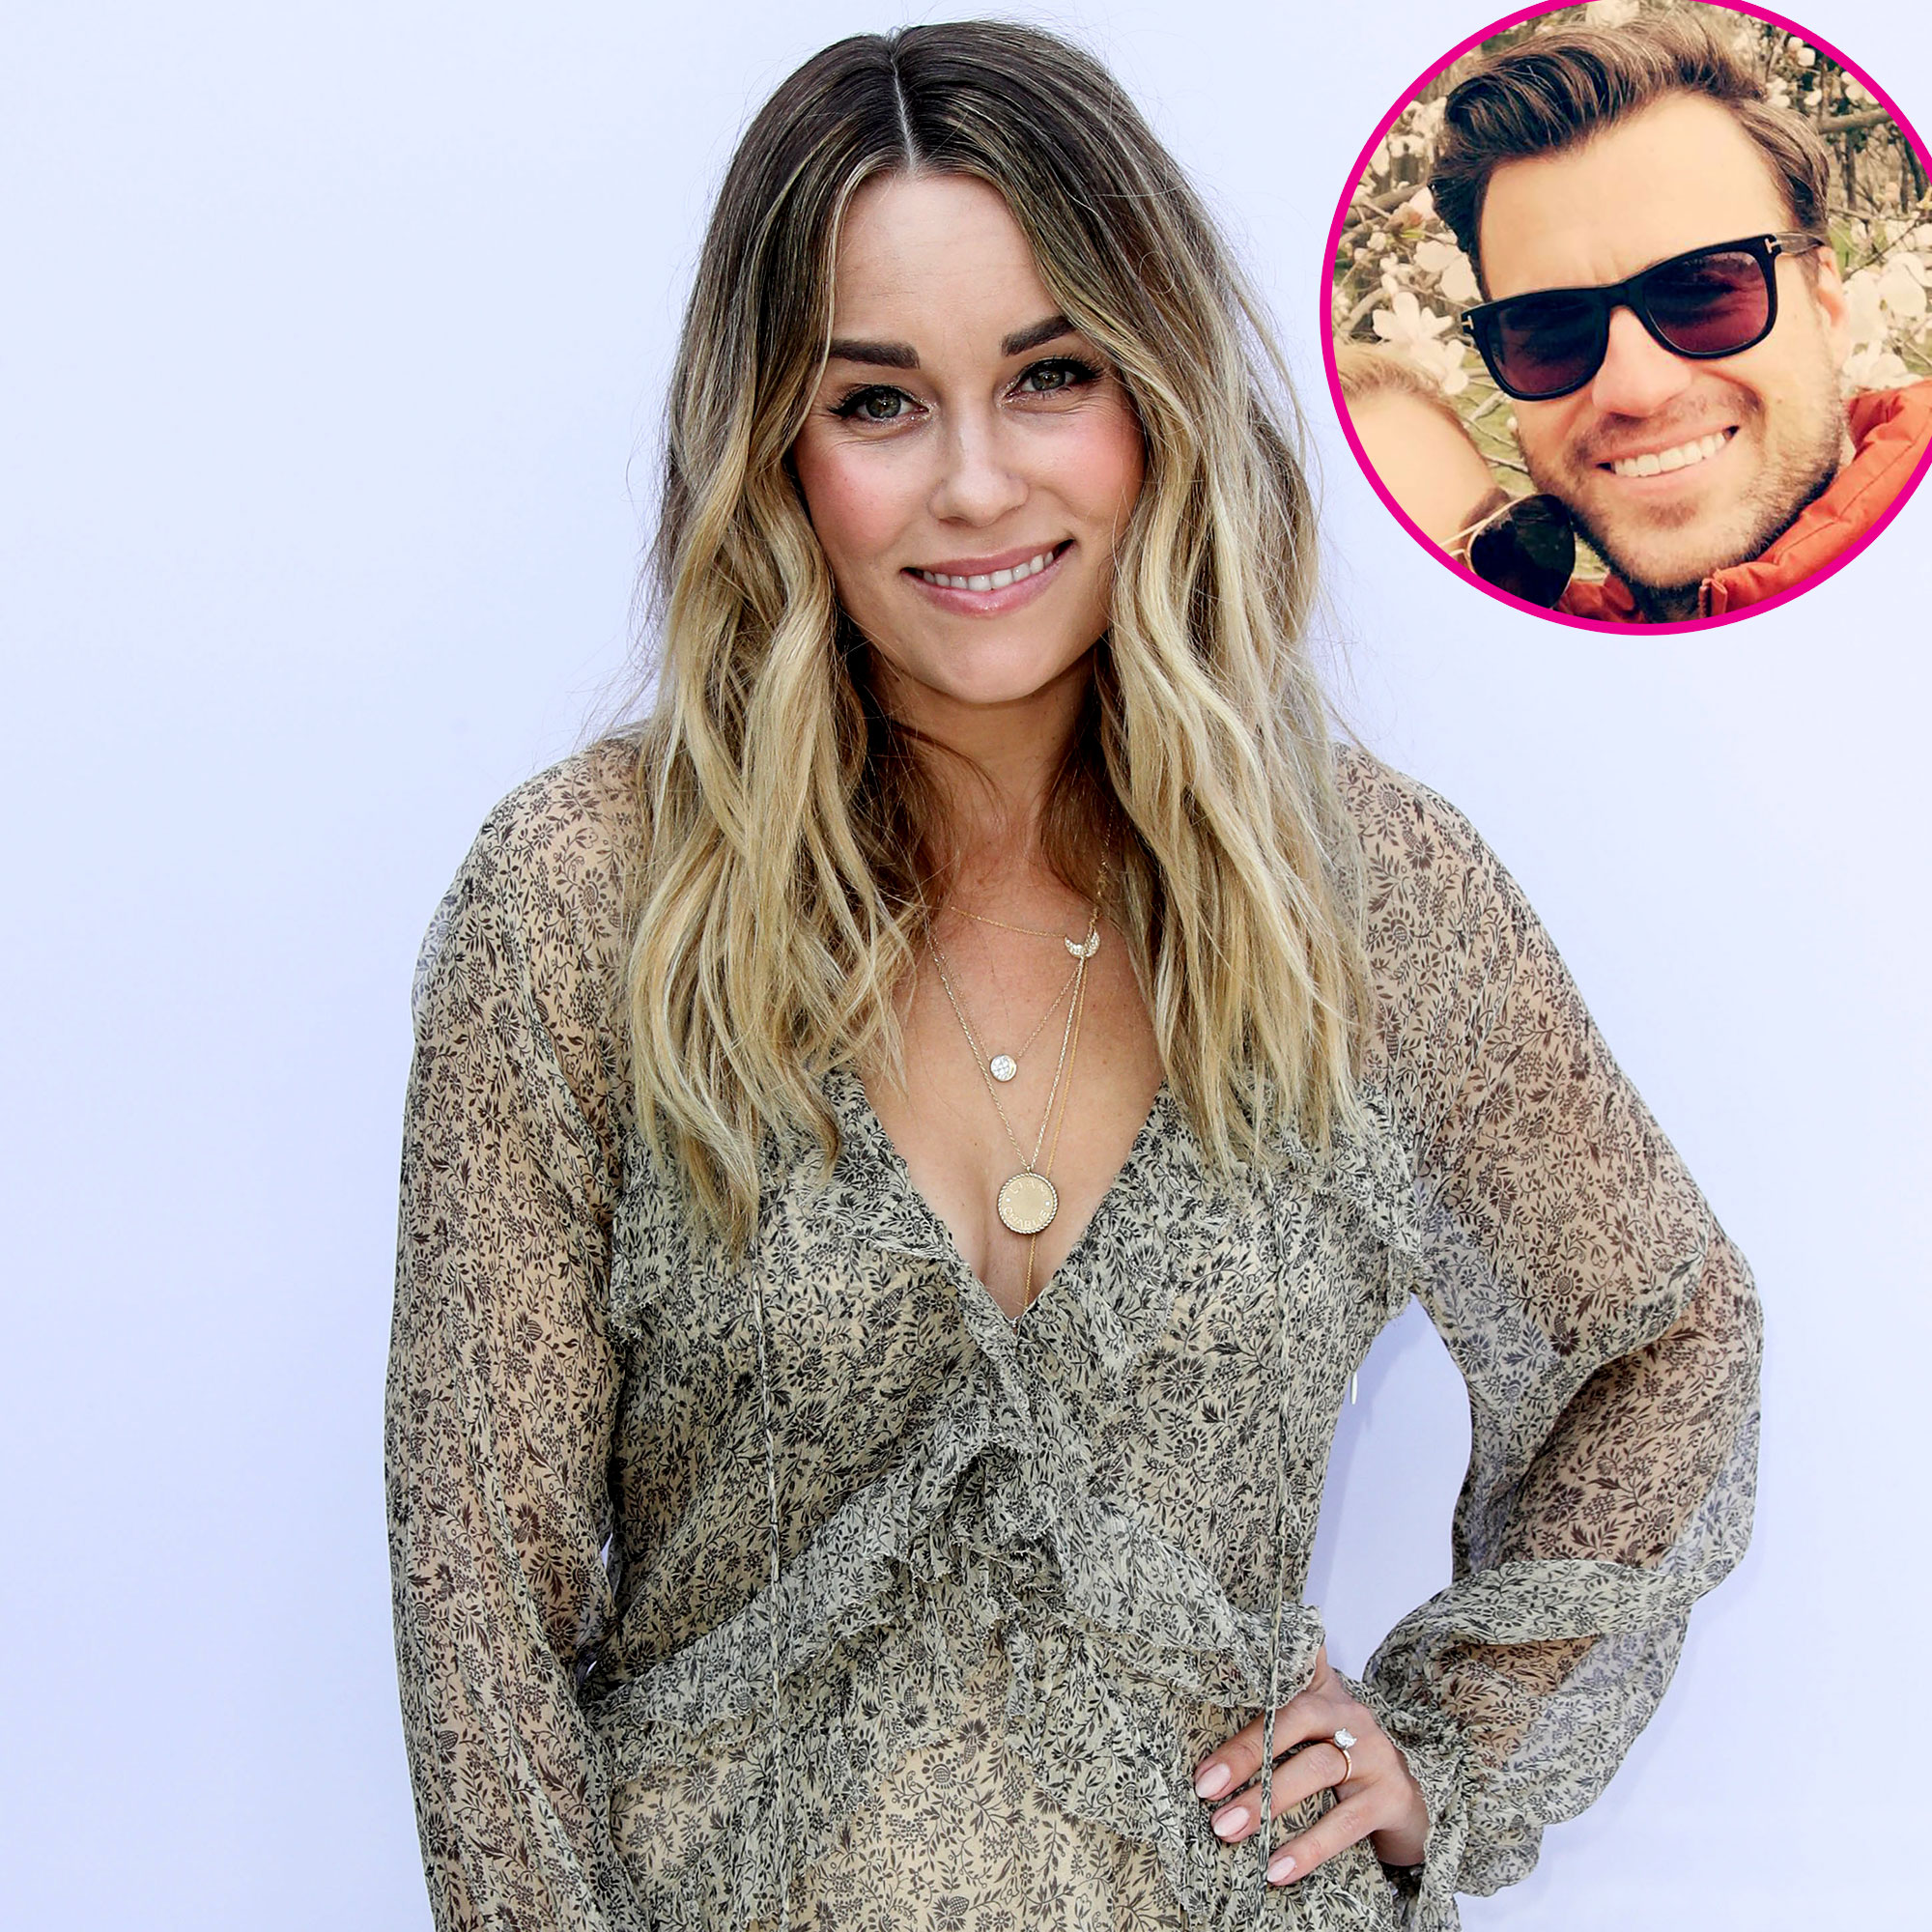 Lauren Conrad: My husband was the first person I could think about